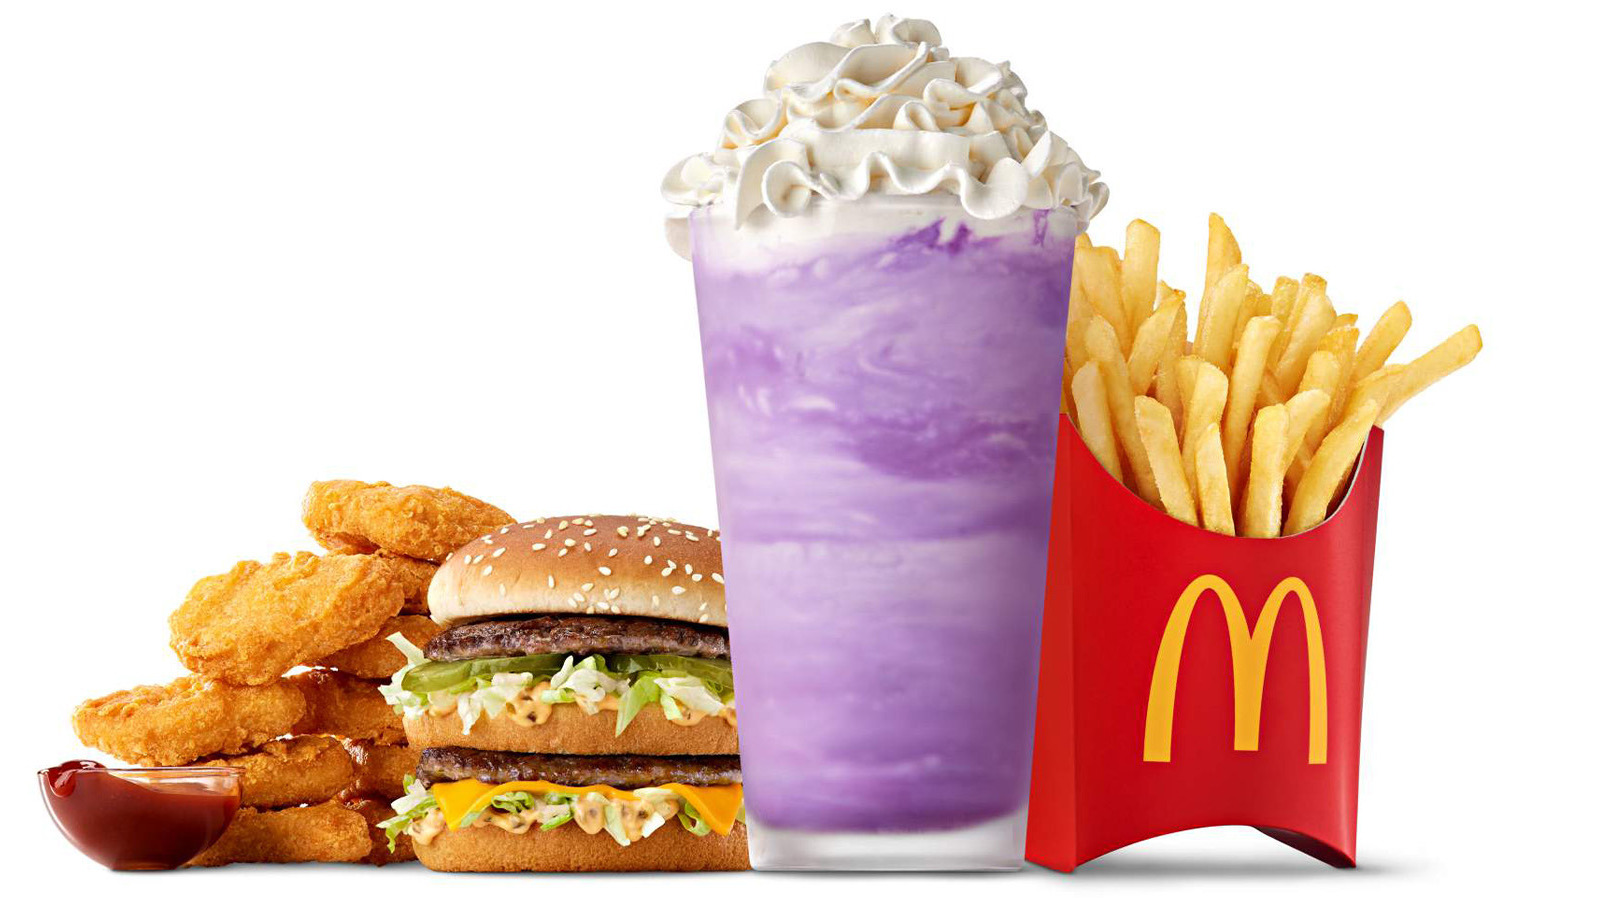 McDonald's Launches A New GrimaceThemed Shake And Spicy Hamburger